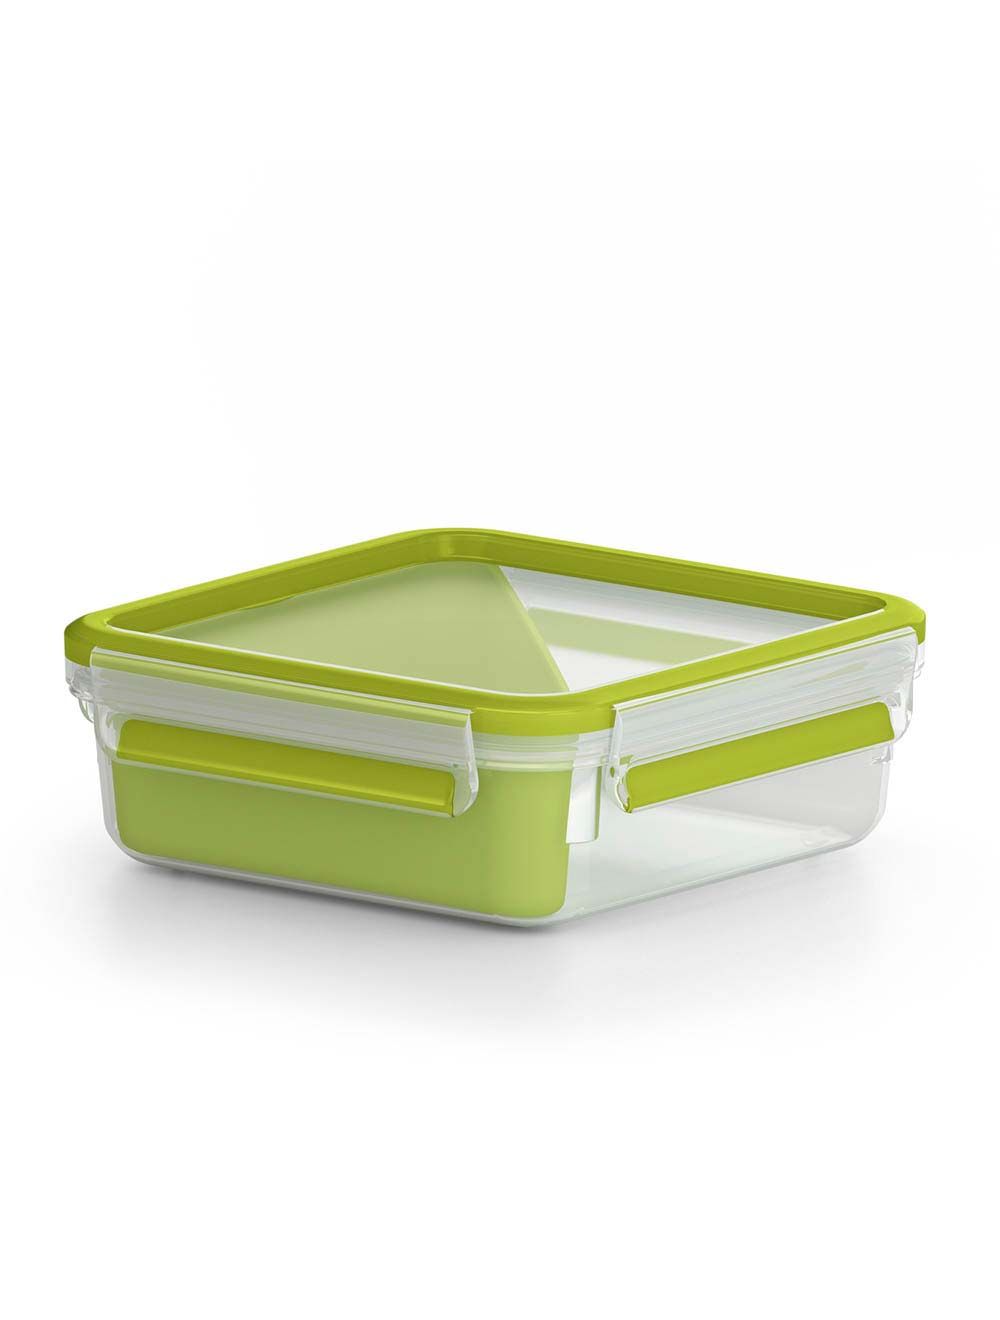 Tefal MAsterSeal Food Keeper 0.85 Litre Sandwick Box Square Food Container, K3100812